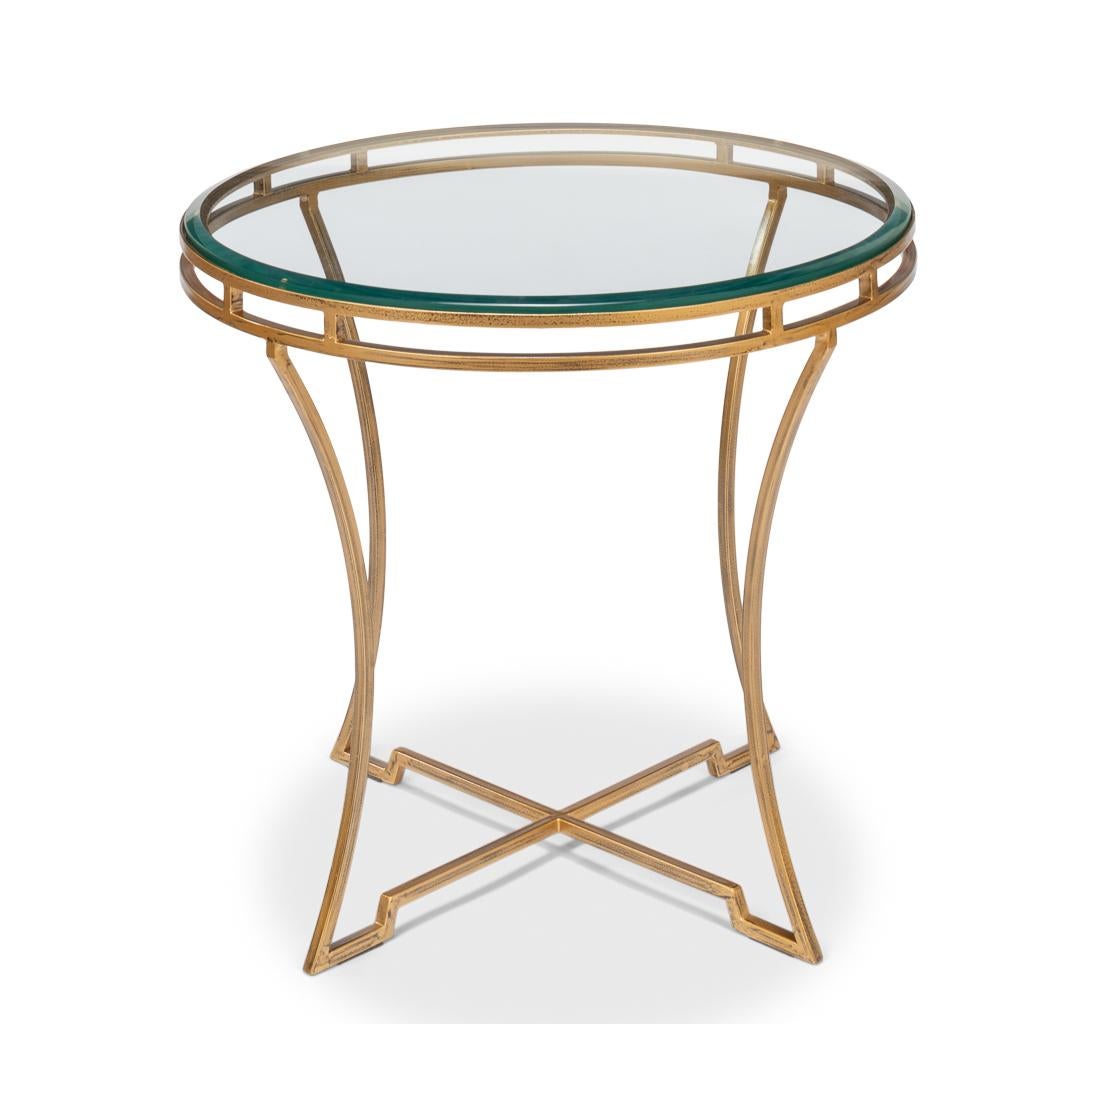 This piece stands out with its minimalist design, elevated by a warm, gold finish that exudes elegance and exclusivity. The table features a round, clear glass top, perfectly complementing the openwork gilded iron frame beneath.

With inswept